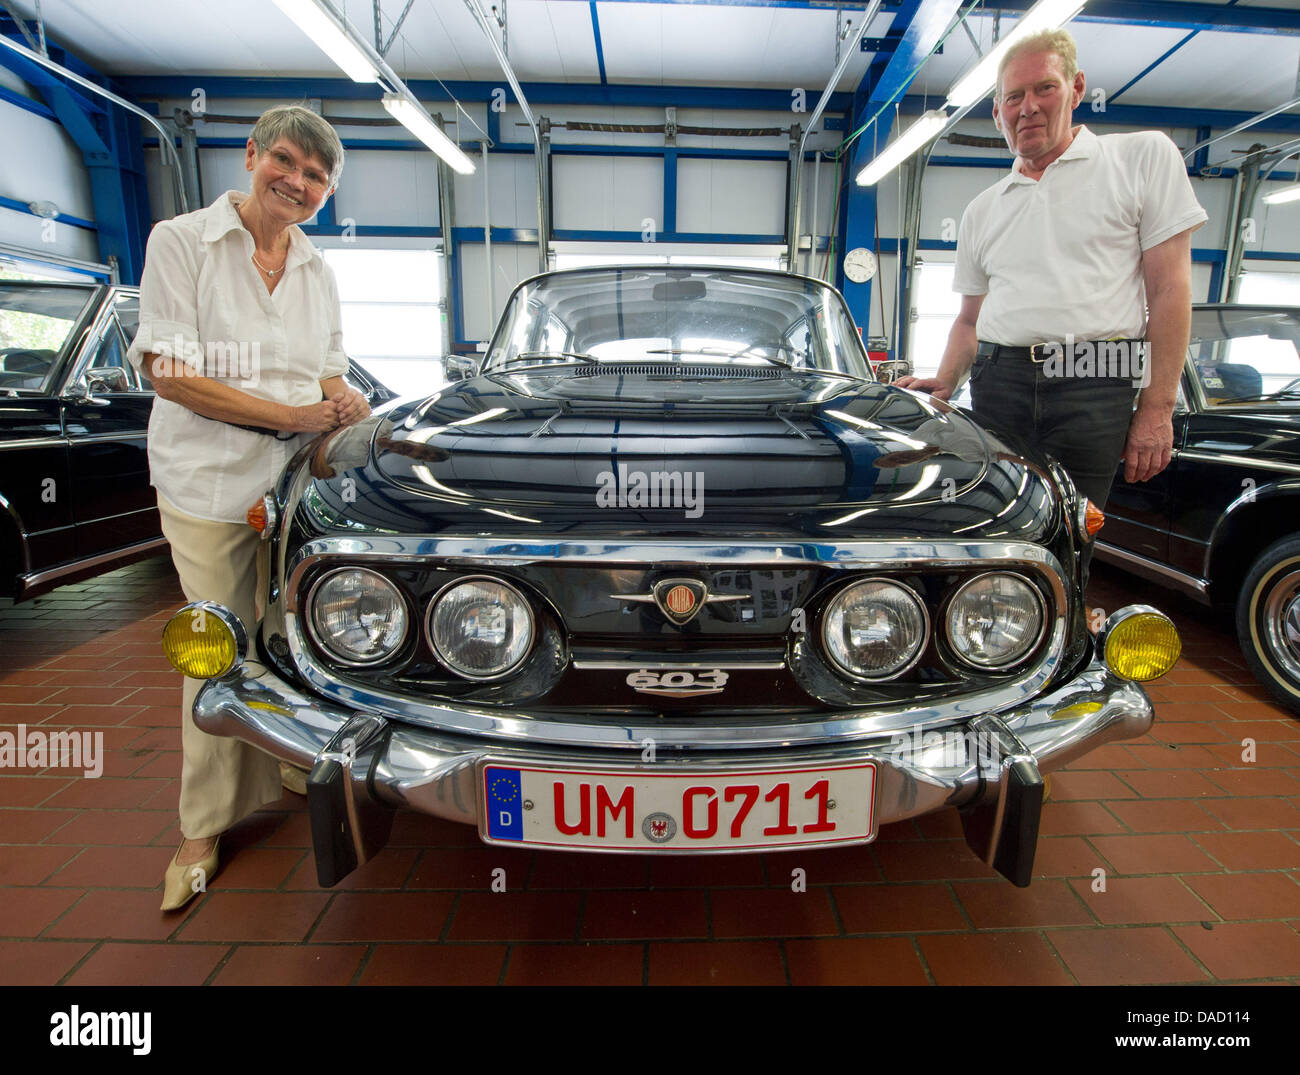 Car owners and collectors Iris and Juergen Riesebeck (R) pose next to a 1975 Tatra 603 in their Tatra car gallery in Angermuende, Germany, 24 August 2011. The Tatra limousine was a favourite car of former Eastern Bloc officials. Nowadays, these cars which were originally manufactured in former Czechoslovakia, have a scarcity value. Photo: Patrick Pleul Stock Photo